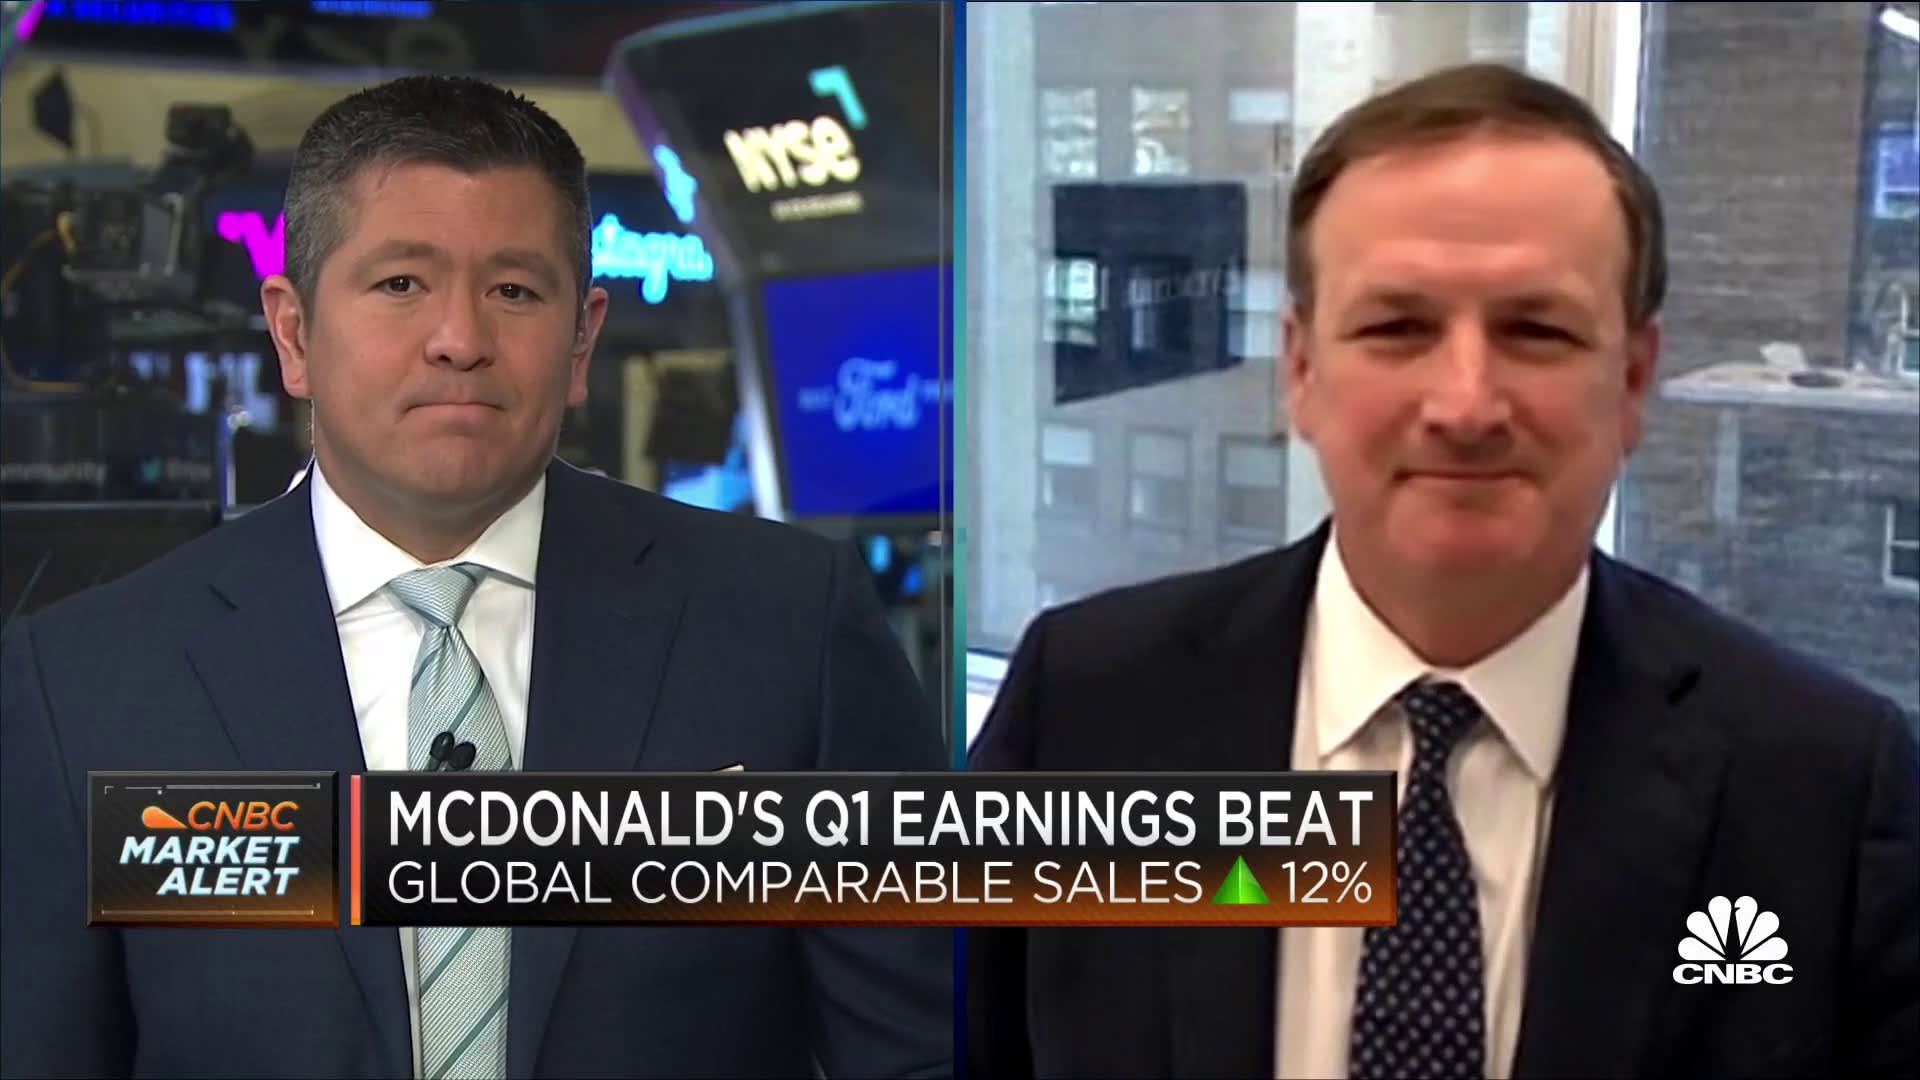 We're back to looking at McDonald's as an inflation-protected staple, says  Evercore's Palmer